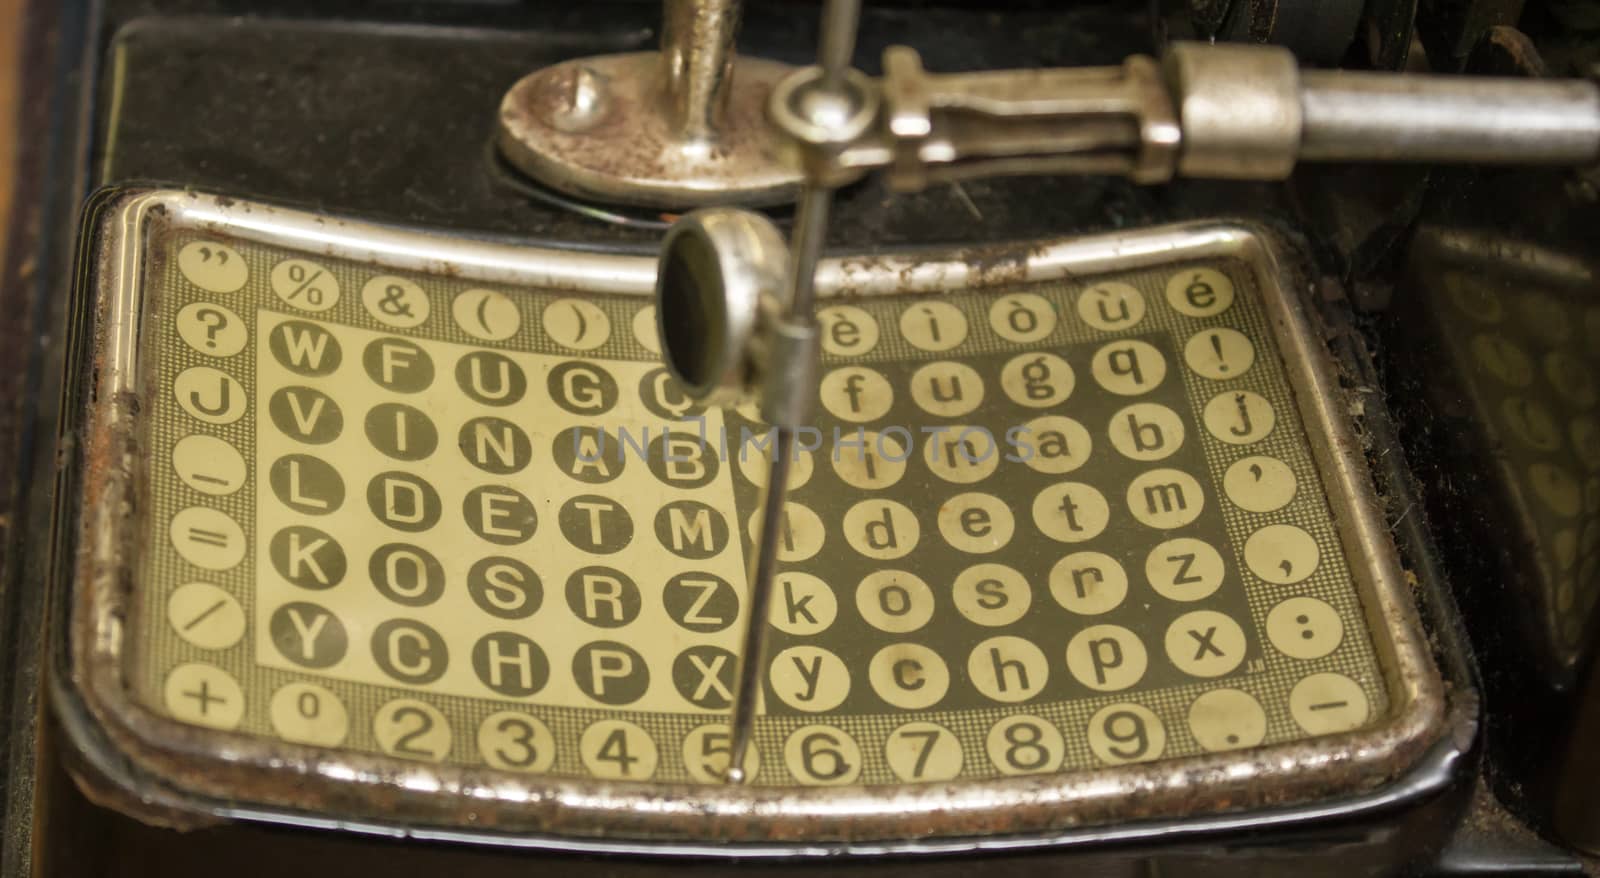 encryption code used in war to hide messages to the enemy